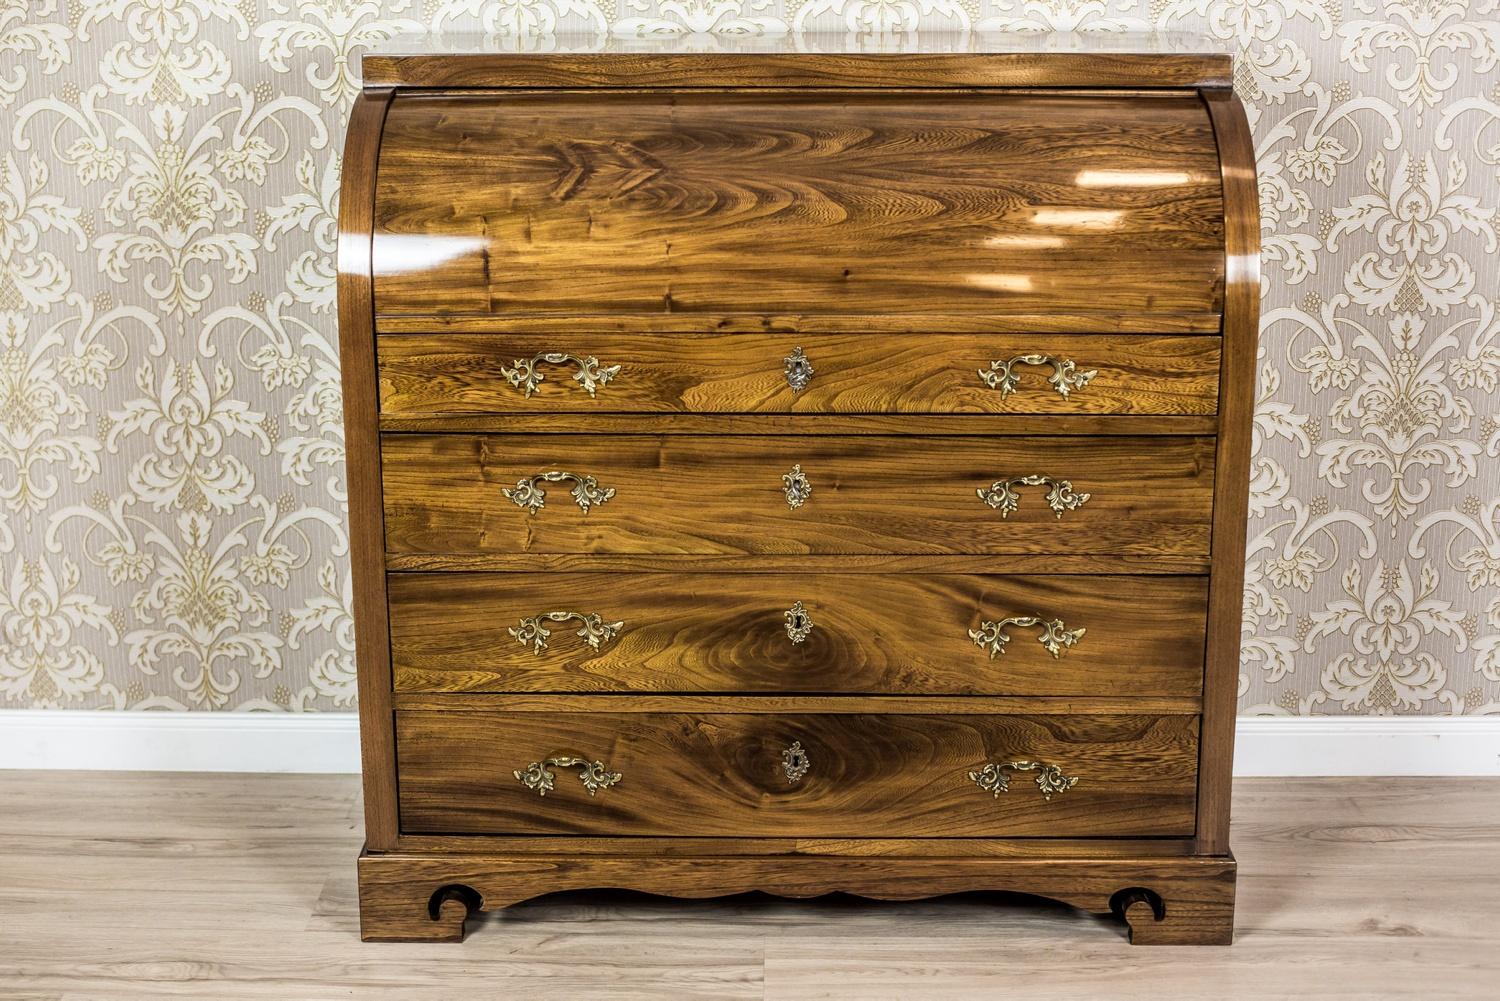 We present you this piece of furniture made of solid elm wood with a beautiful grain, circa 1840.
The chest section hides four drawers and a cylindrically closed lid; it is placed on a separate base.
The upper drawer of the secretary desk is